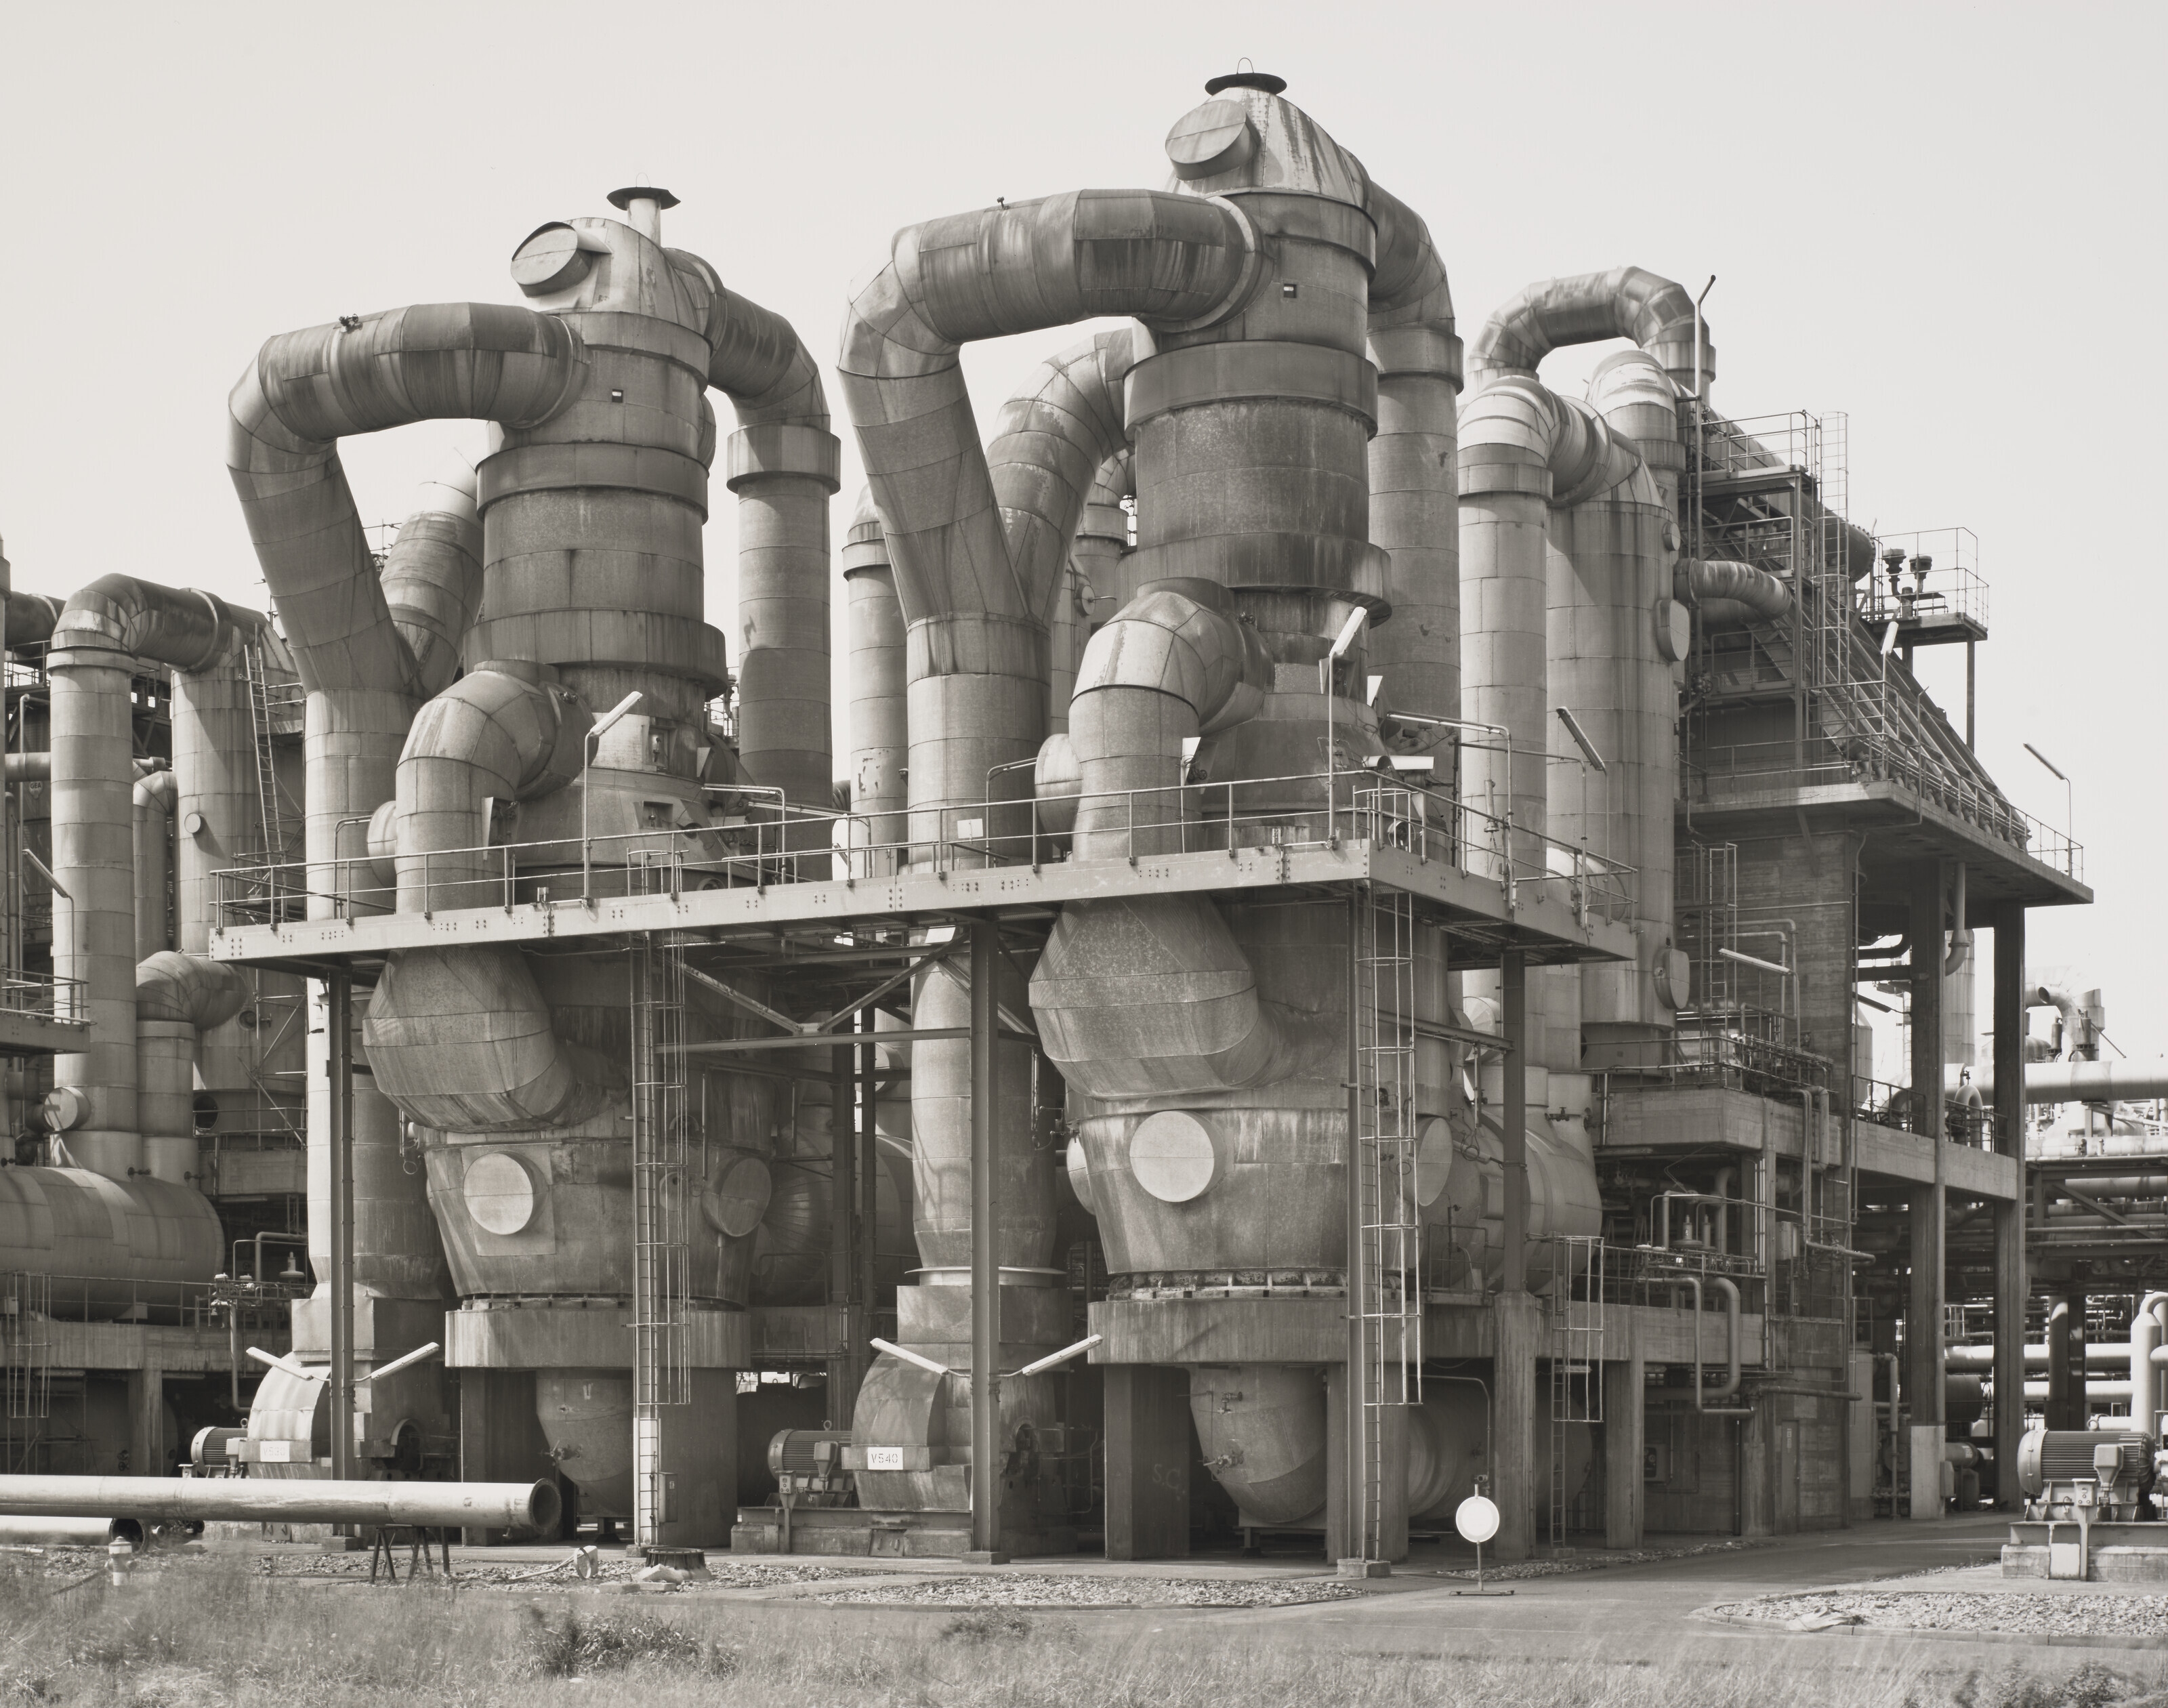 Chemical Plant, Wesseling near Cologne, Germany, 1983 by Bernd & Hilla Becher, 1934